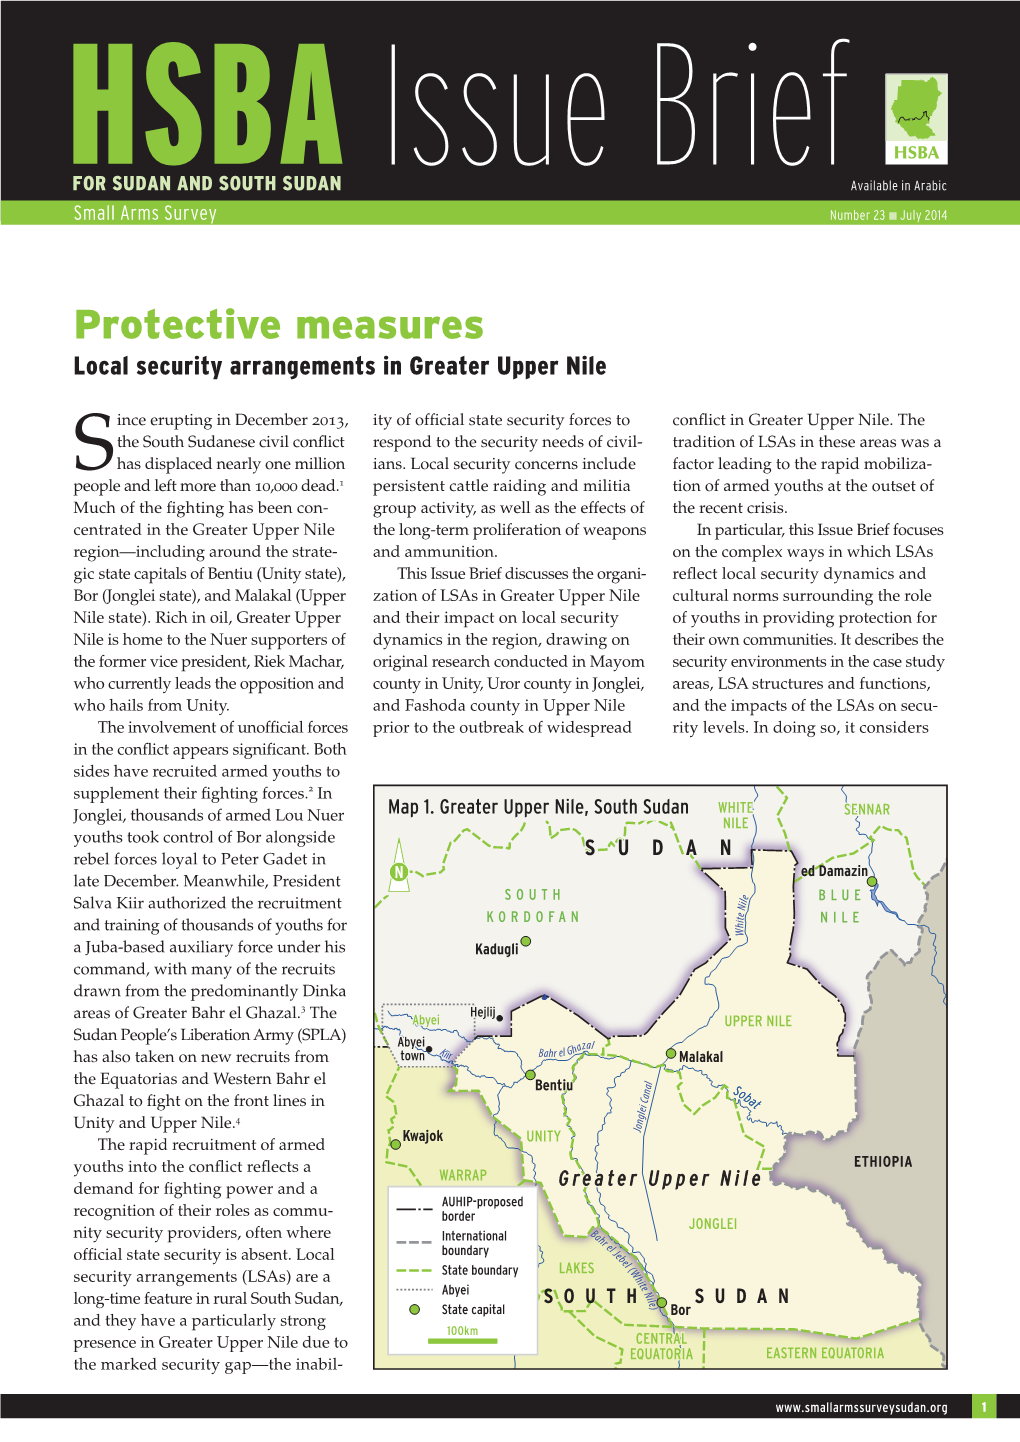 Protective Measures: Local Security Arrangements in Greater Upper Nile